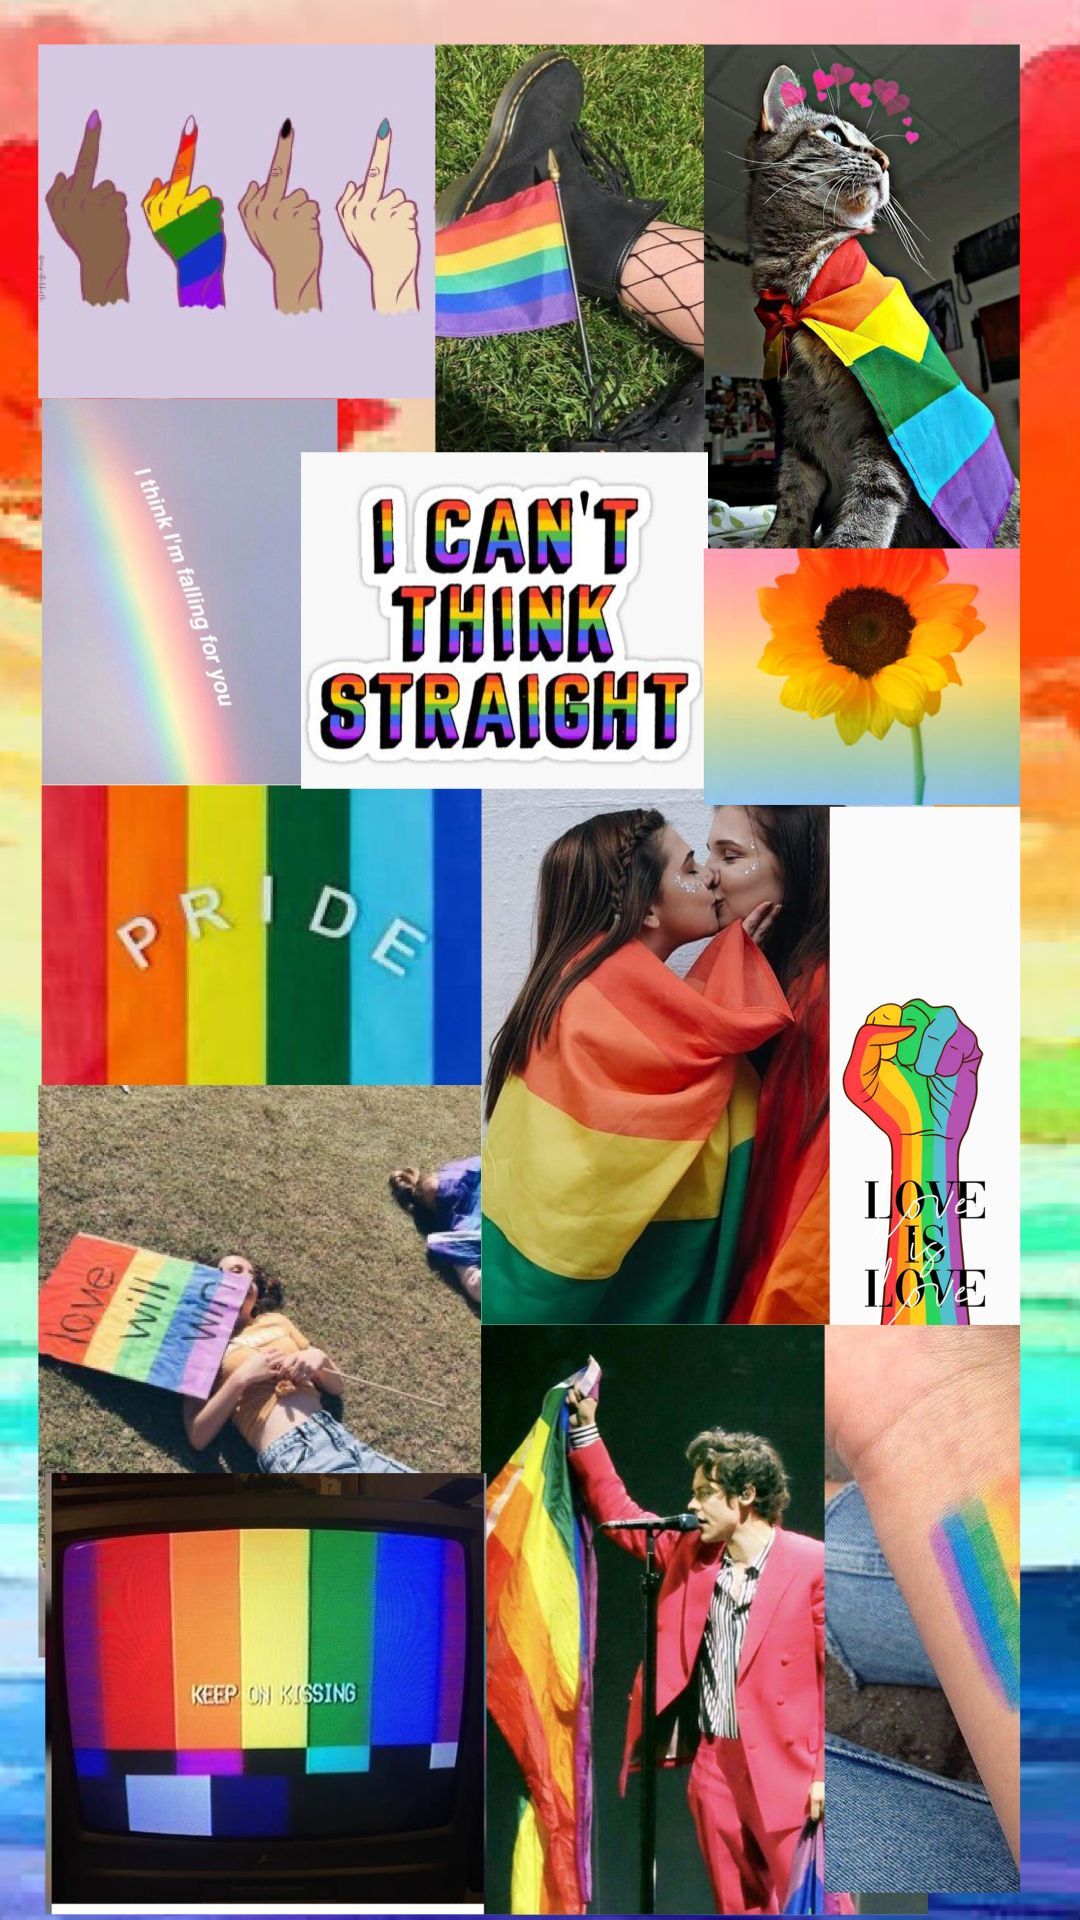 A collage of images of lgbtq+ pride, including a rainbow flag, a hand holding a pride flag, and the text 